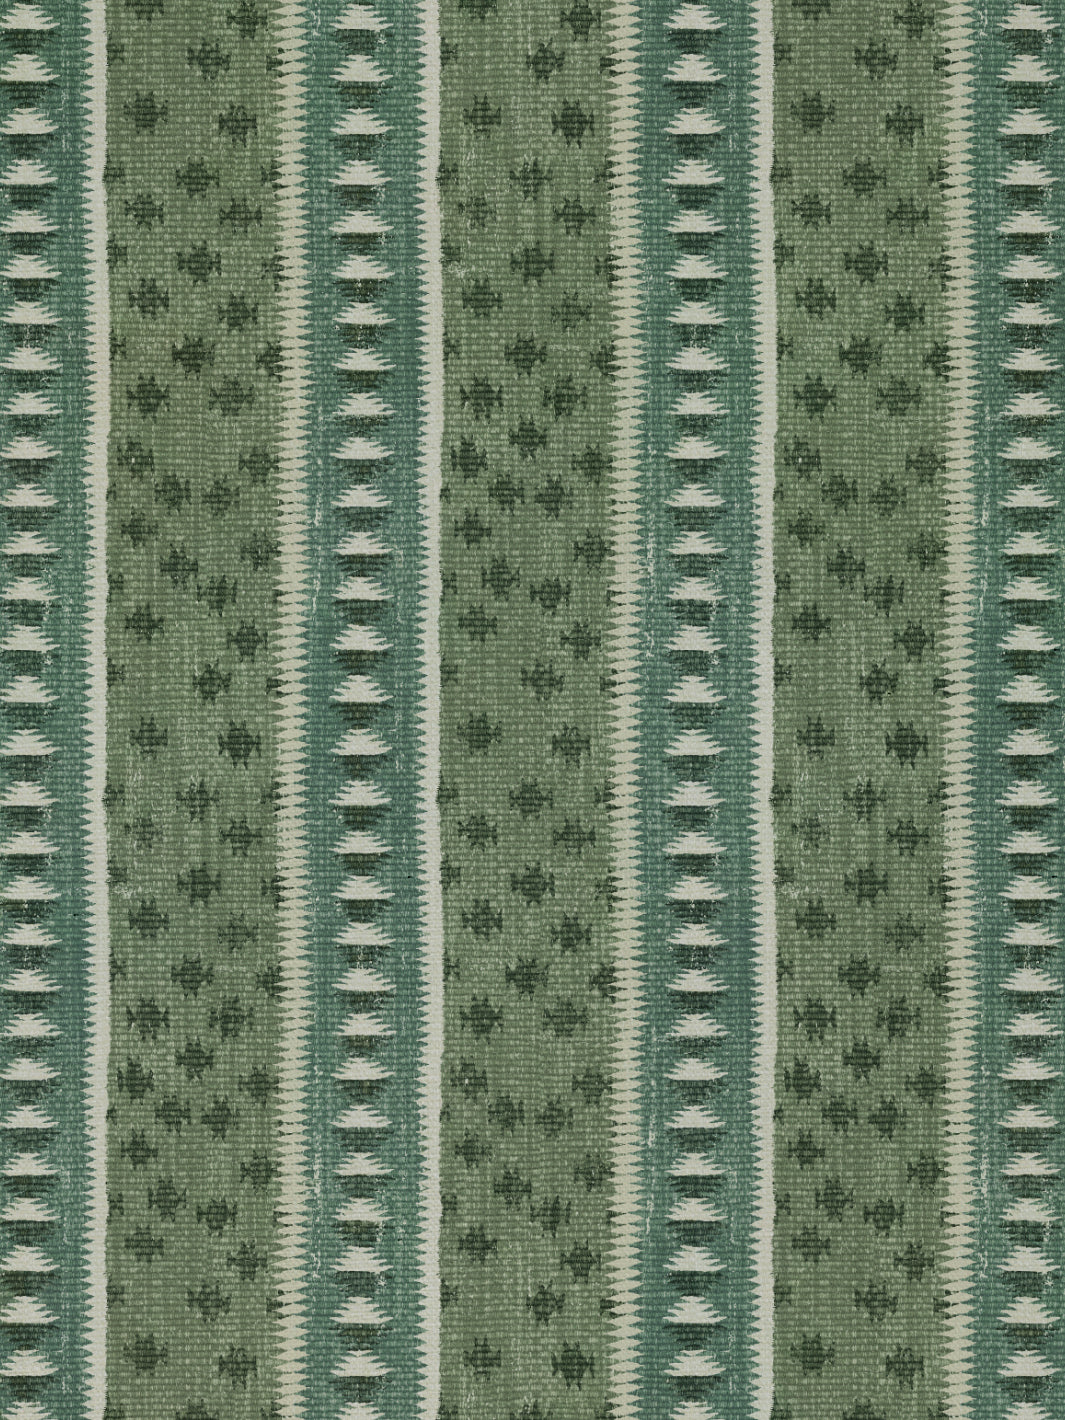 'Northstar Stripe' Linen Fabric by Nathan Turner - Green